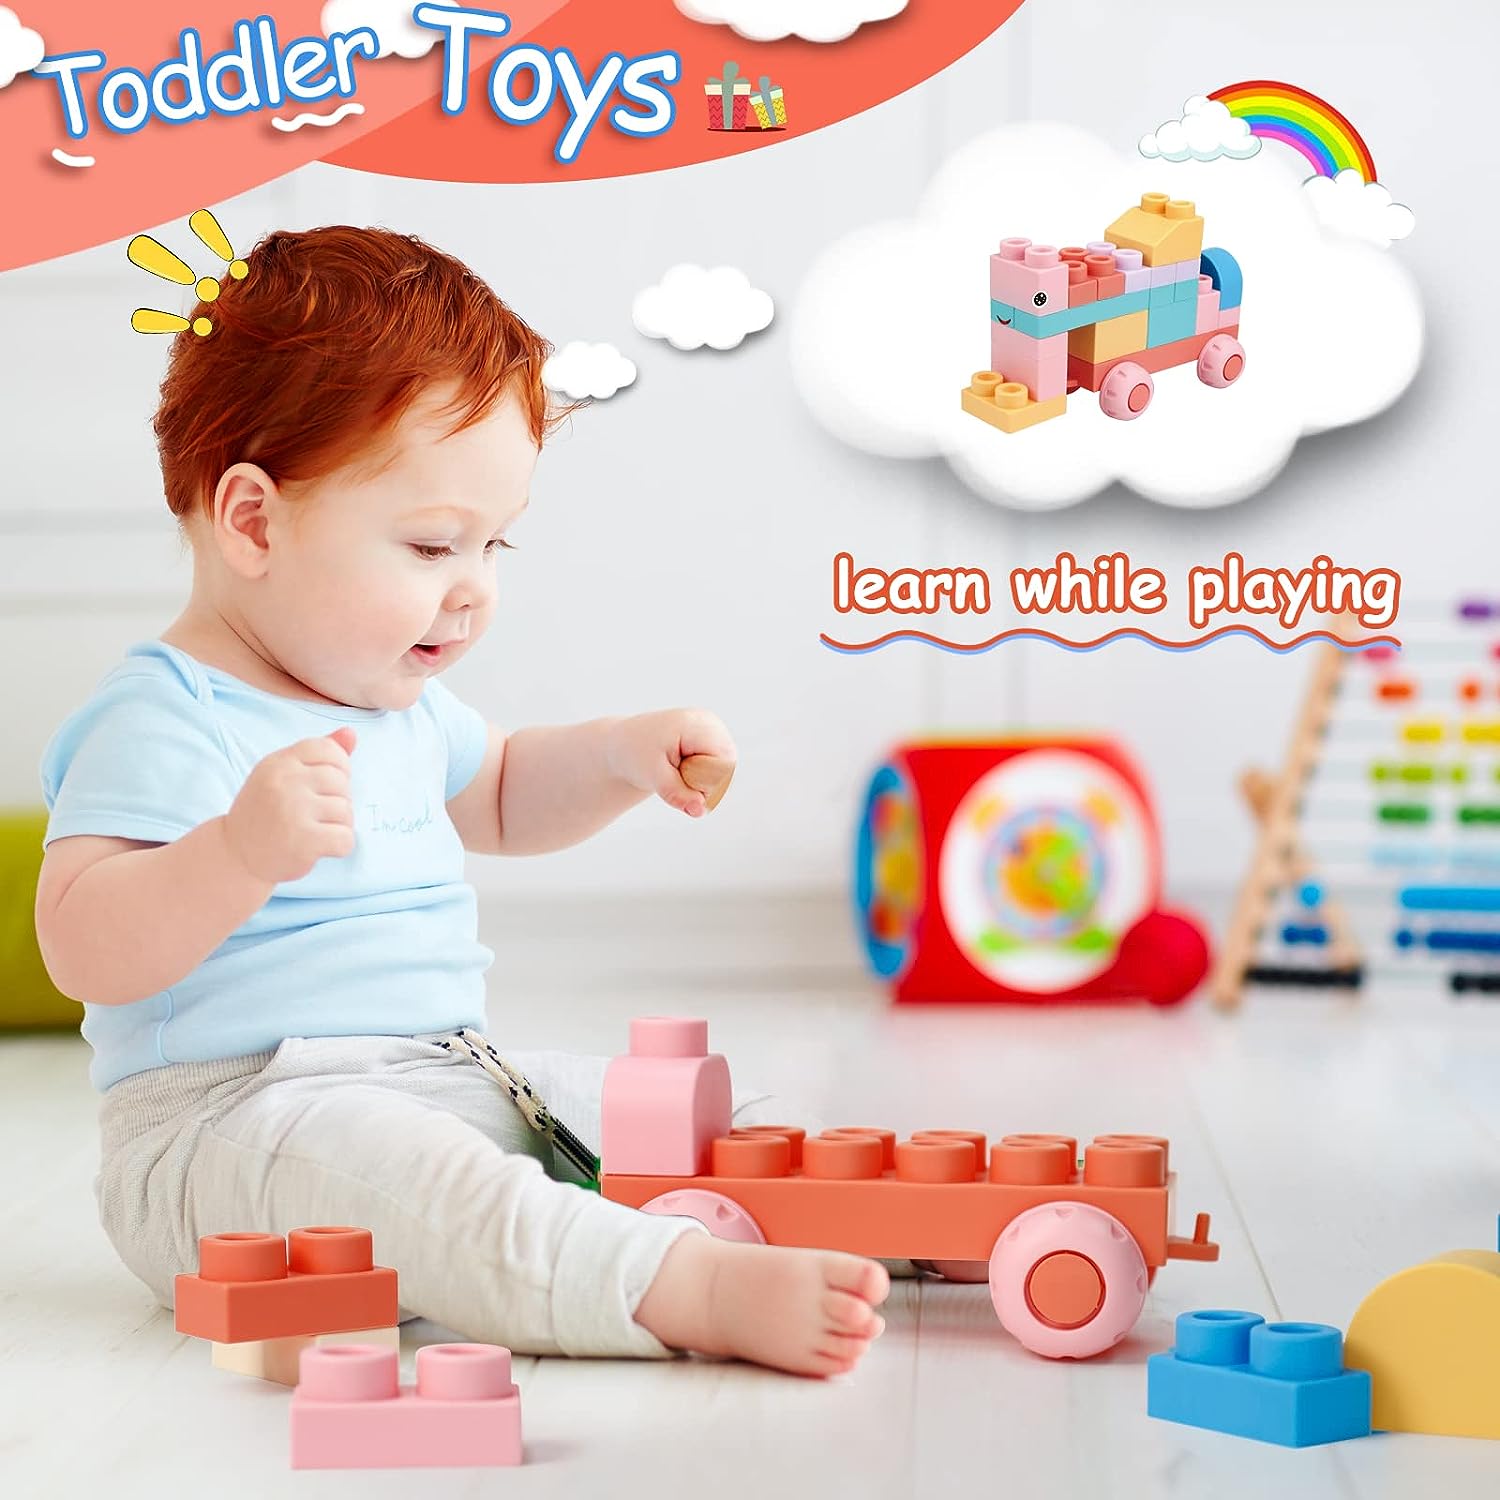 Top STEM Soft Building Block Sets for Kids Aged 18 months to 6 years old, preschool.Large Construction Block Toys for Toddler to Improve Imagination、Creativity、Hands-on Ability : Toys Games